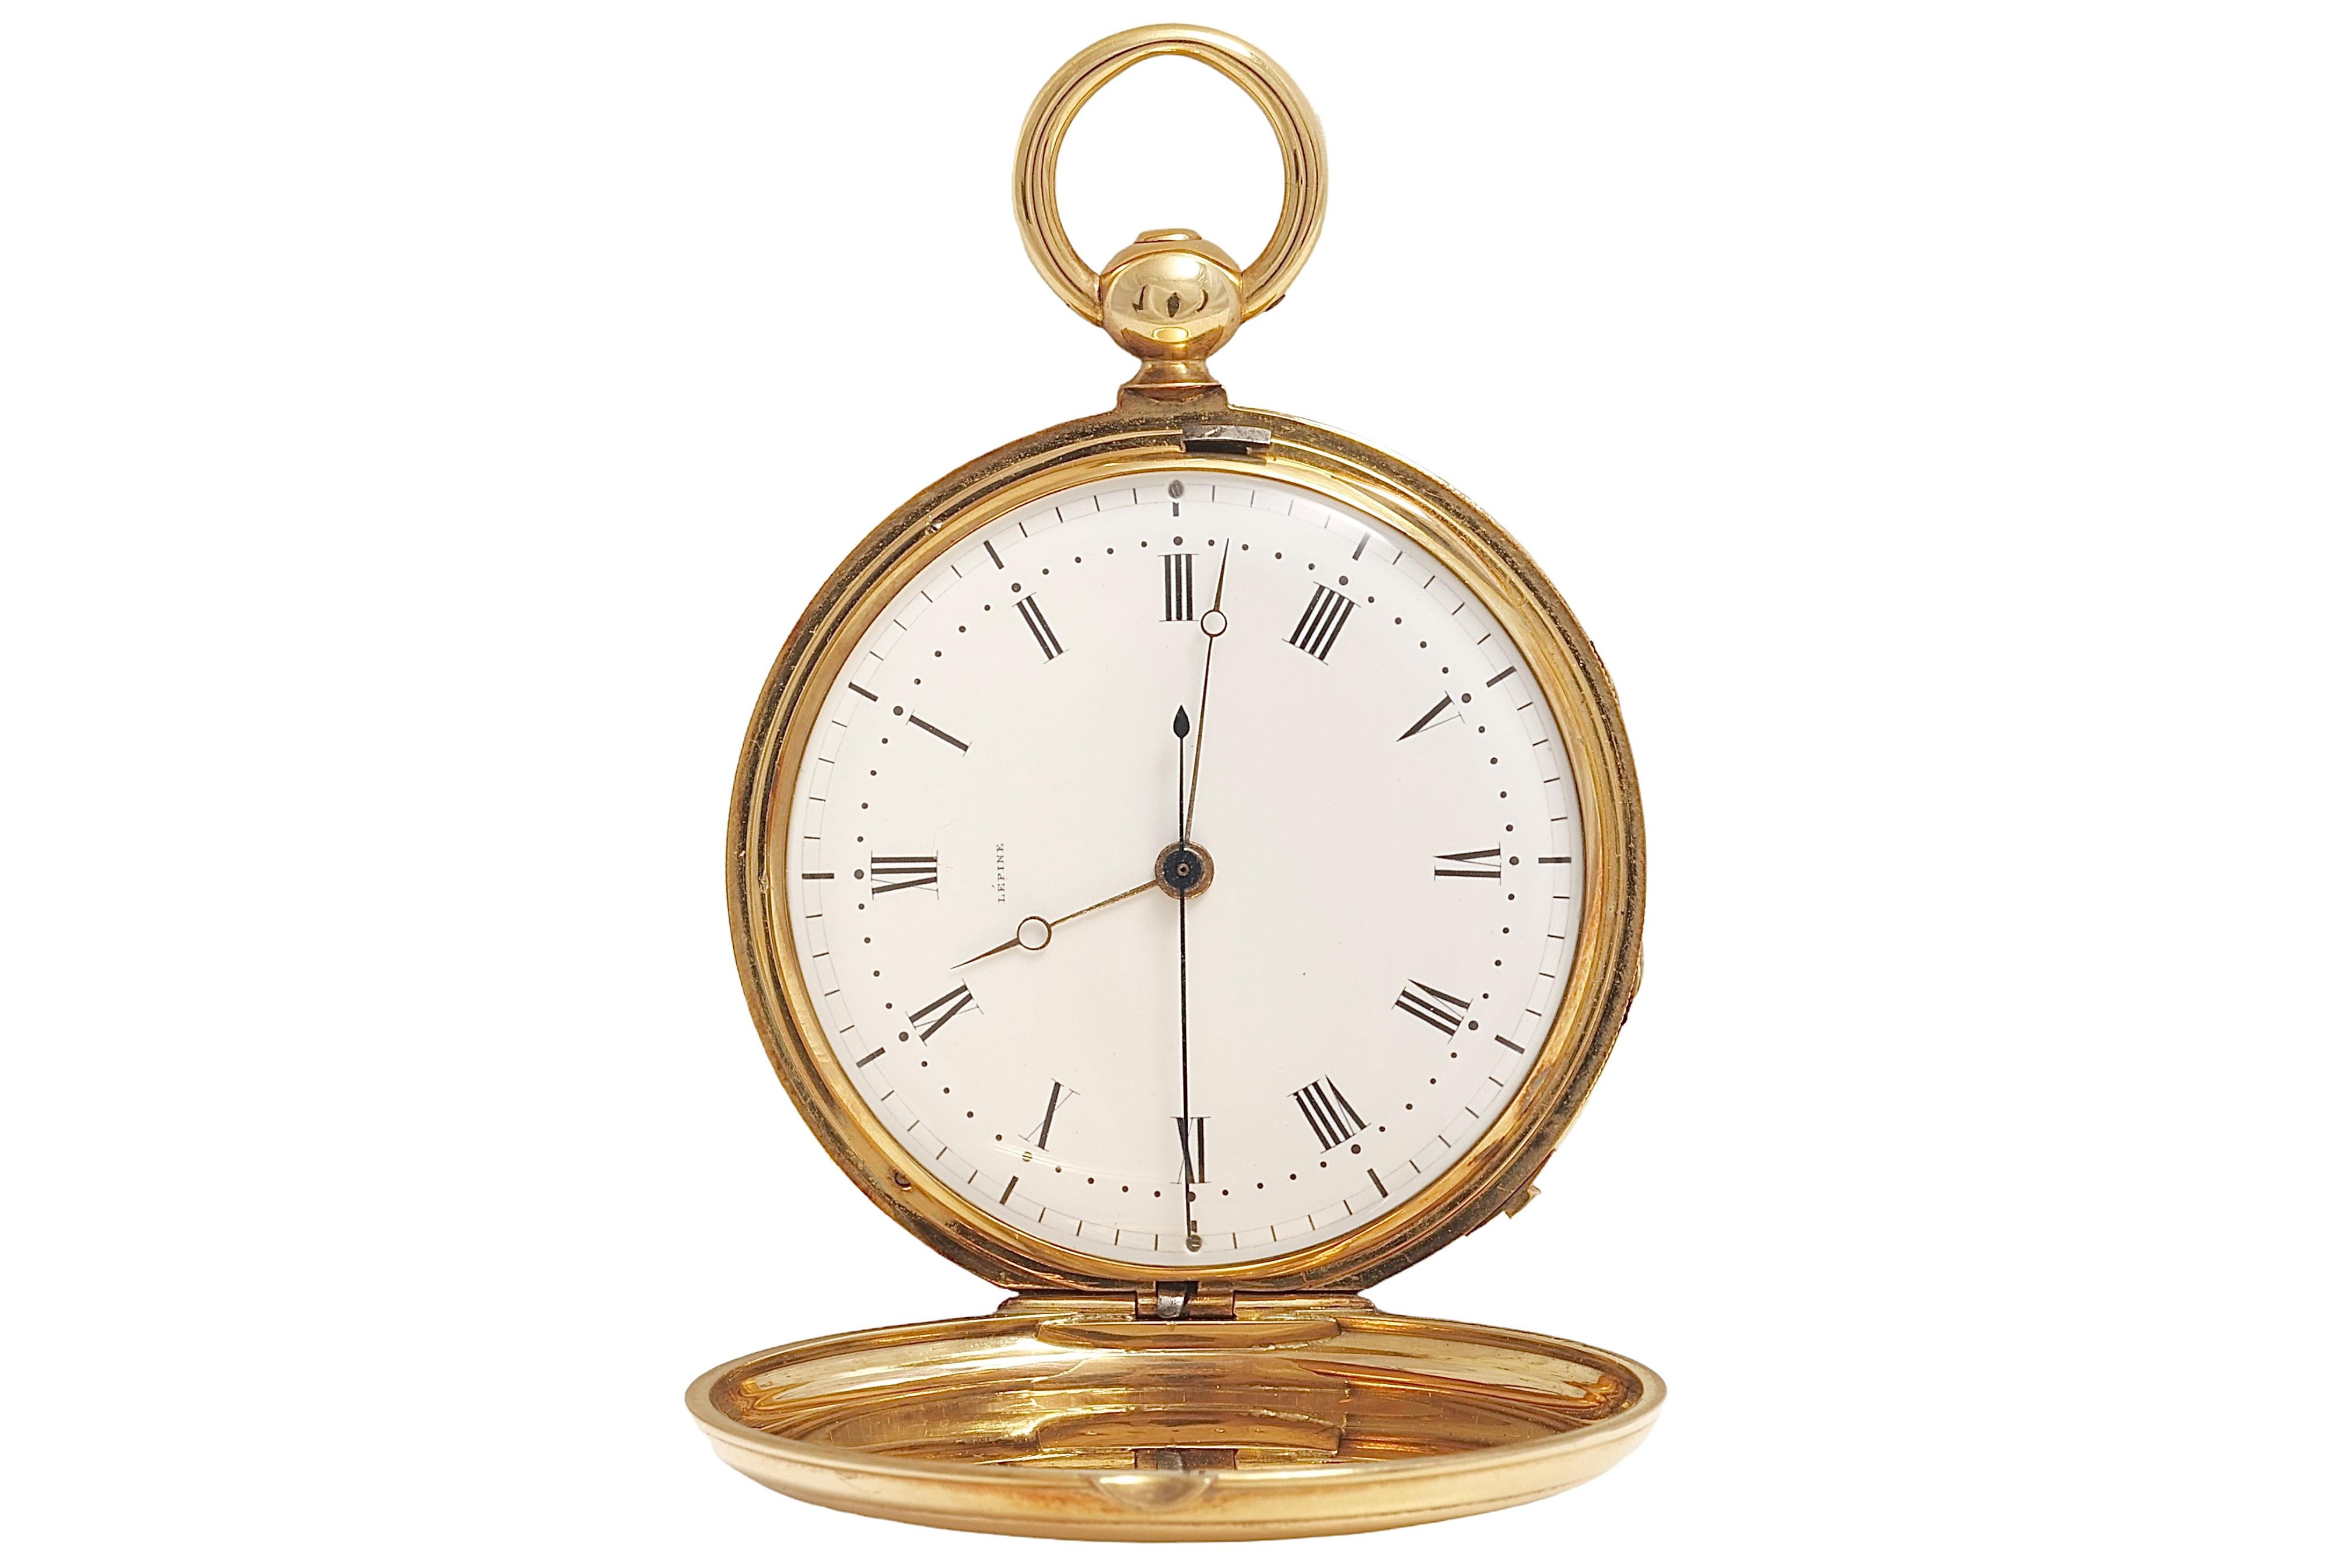 18 Kt Solid Yellow Gold Lépine pocket watch Second Morte & Double Winding Barrel, Chronograph in Amazing Collectors Condition

Function : Seconde Morte with Stop function which was used as chronograph seconds counter

Movement : Mechanical Manual